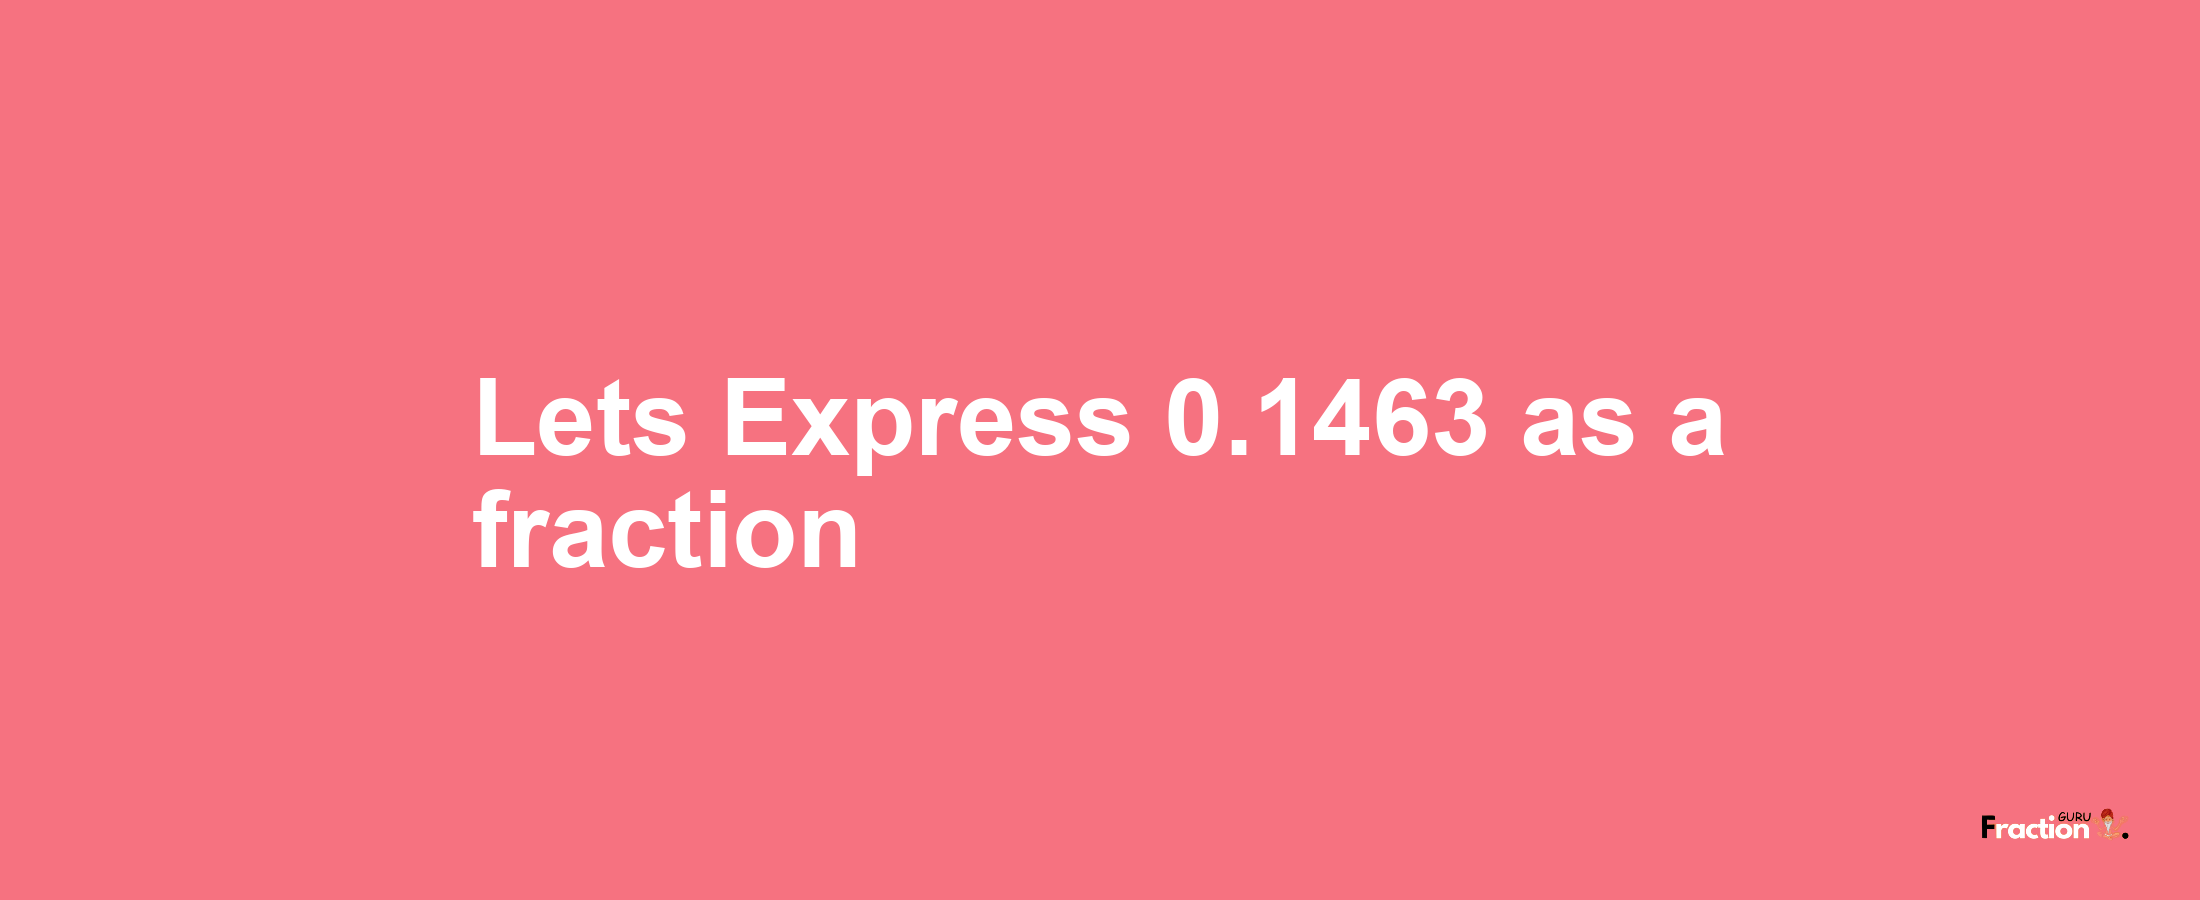 Lets Express 0.1463 as afraction